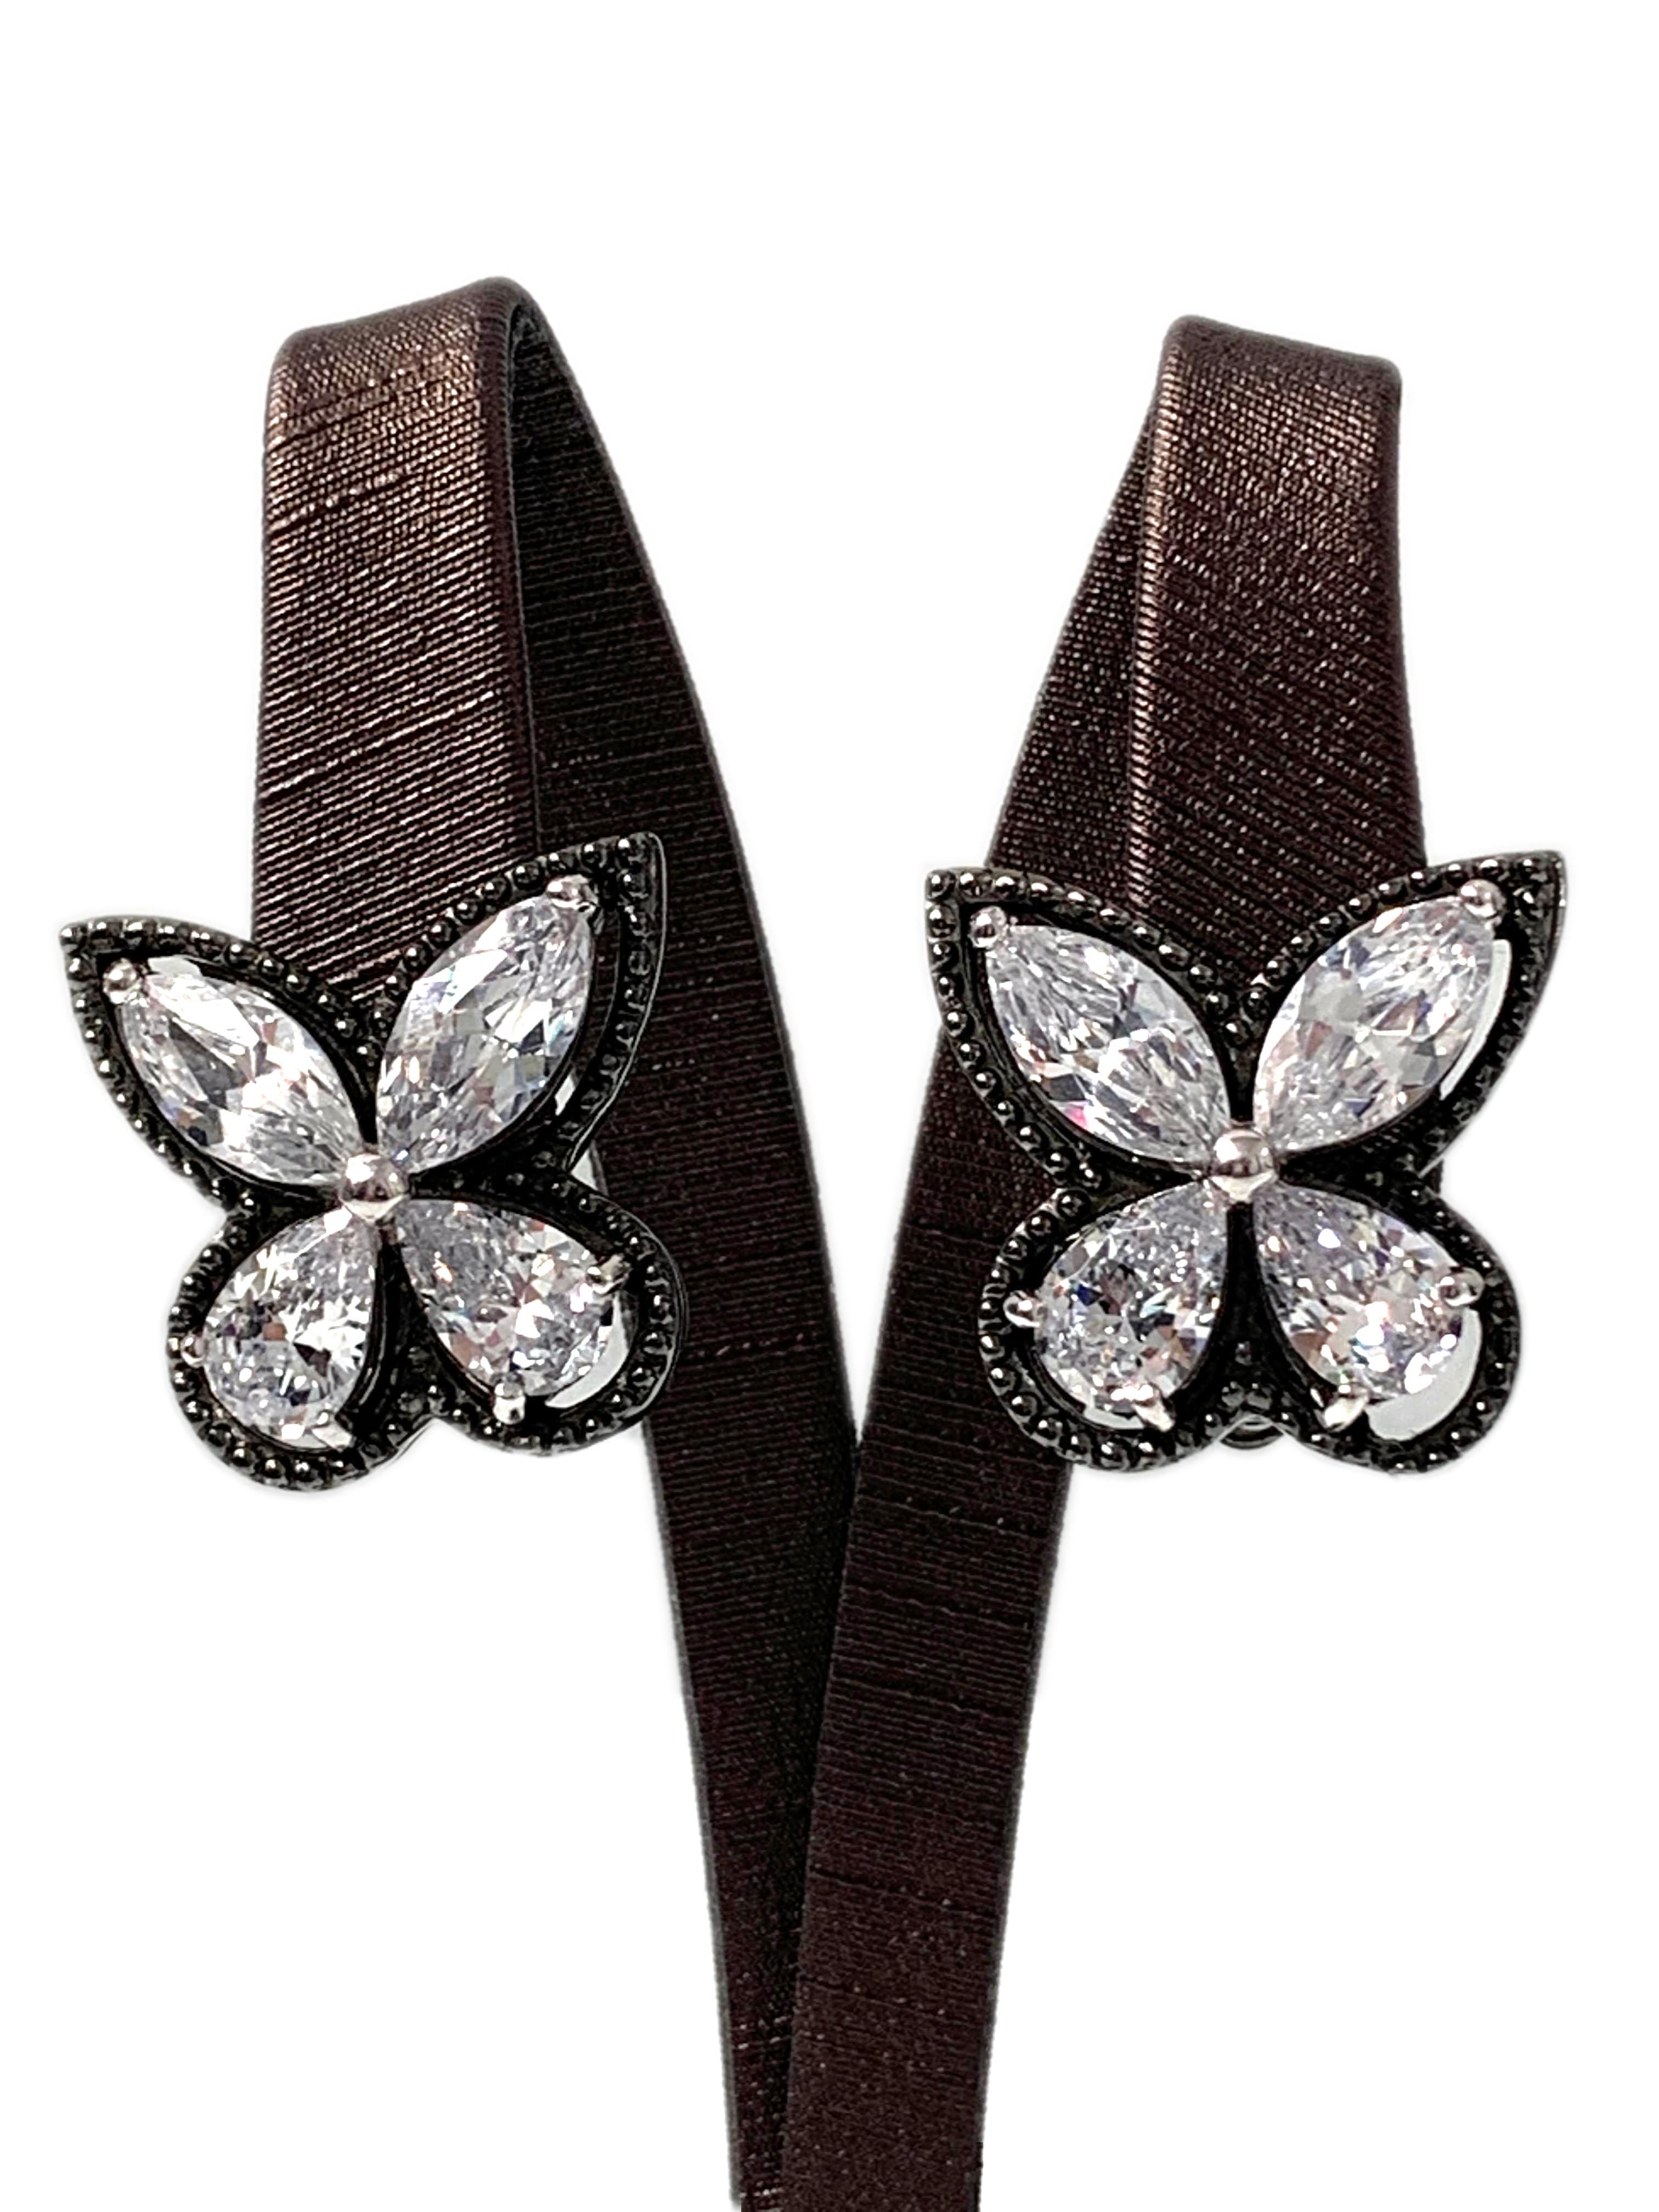 Fabulous Large Butterfly Faux Diamond CZ Clip-on Earrings

These earrings feature top quality marquis and pear shape cubic zirconia, handset in black rhodium plated sterling silver, and adorned with beaded trim. The earrings measure approximately